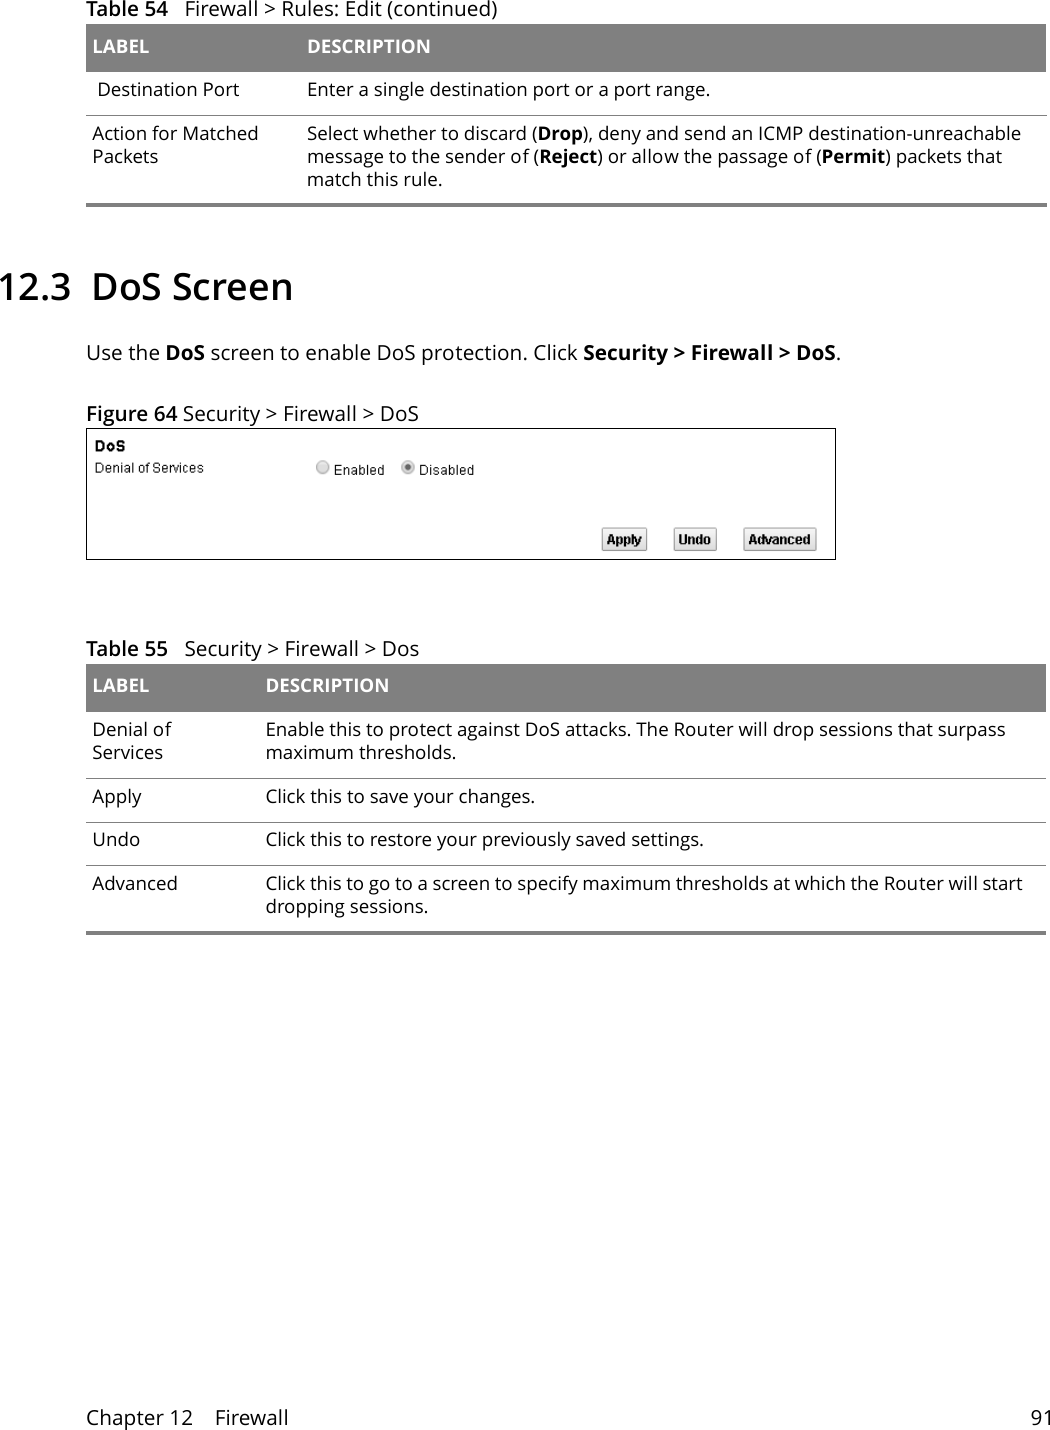 Chapter 12    Firewall 9112.3  DoS ScreenUse the DoS screen to enable DoS protection. Click Security &gt; Firewall &gt; DoS.Figure 64 Security &gt; Firewall &gt; DoSTable 55   Security &gt; Firewall &gt; DosLABEL DESCRIPTIONDenial of ServicesEnable this to protect against DoS attacks. The Router will drop sessions that surpass maximum thresholds.Apply Click this to save your changes.Undo Click this to restore your previously saved settings.Advanced Click this to go to a screen to specify maximum thresholds at which the Router will start dropping sessions. Destination Port Enter a single destination port or a port range.Action for Matched PacketsSelect whether to discard (Drop), deny and send an ICMP destination-unreachable message to the sender of (Reject) or allow the passage of (Permit) packets that match this rule. Table 54   Firewall &gt; Rules: Edit (continued)LABEL DESCRIPTION